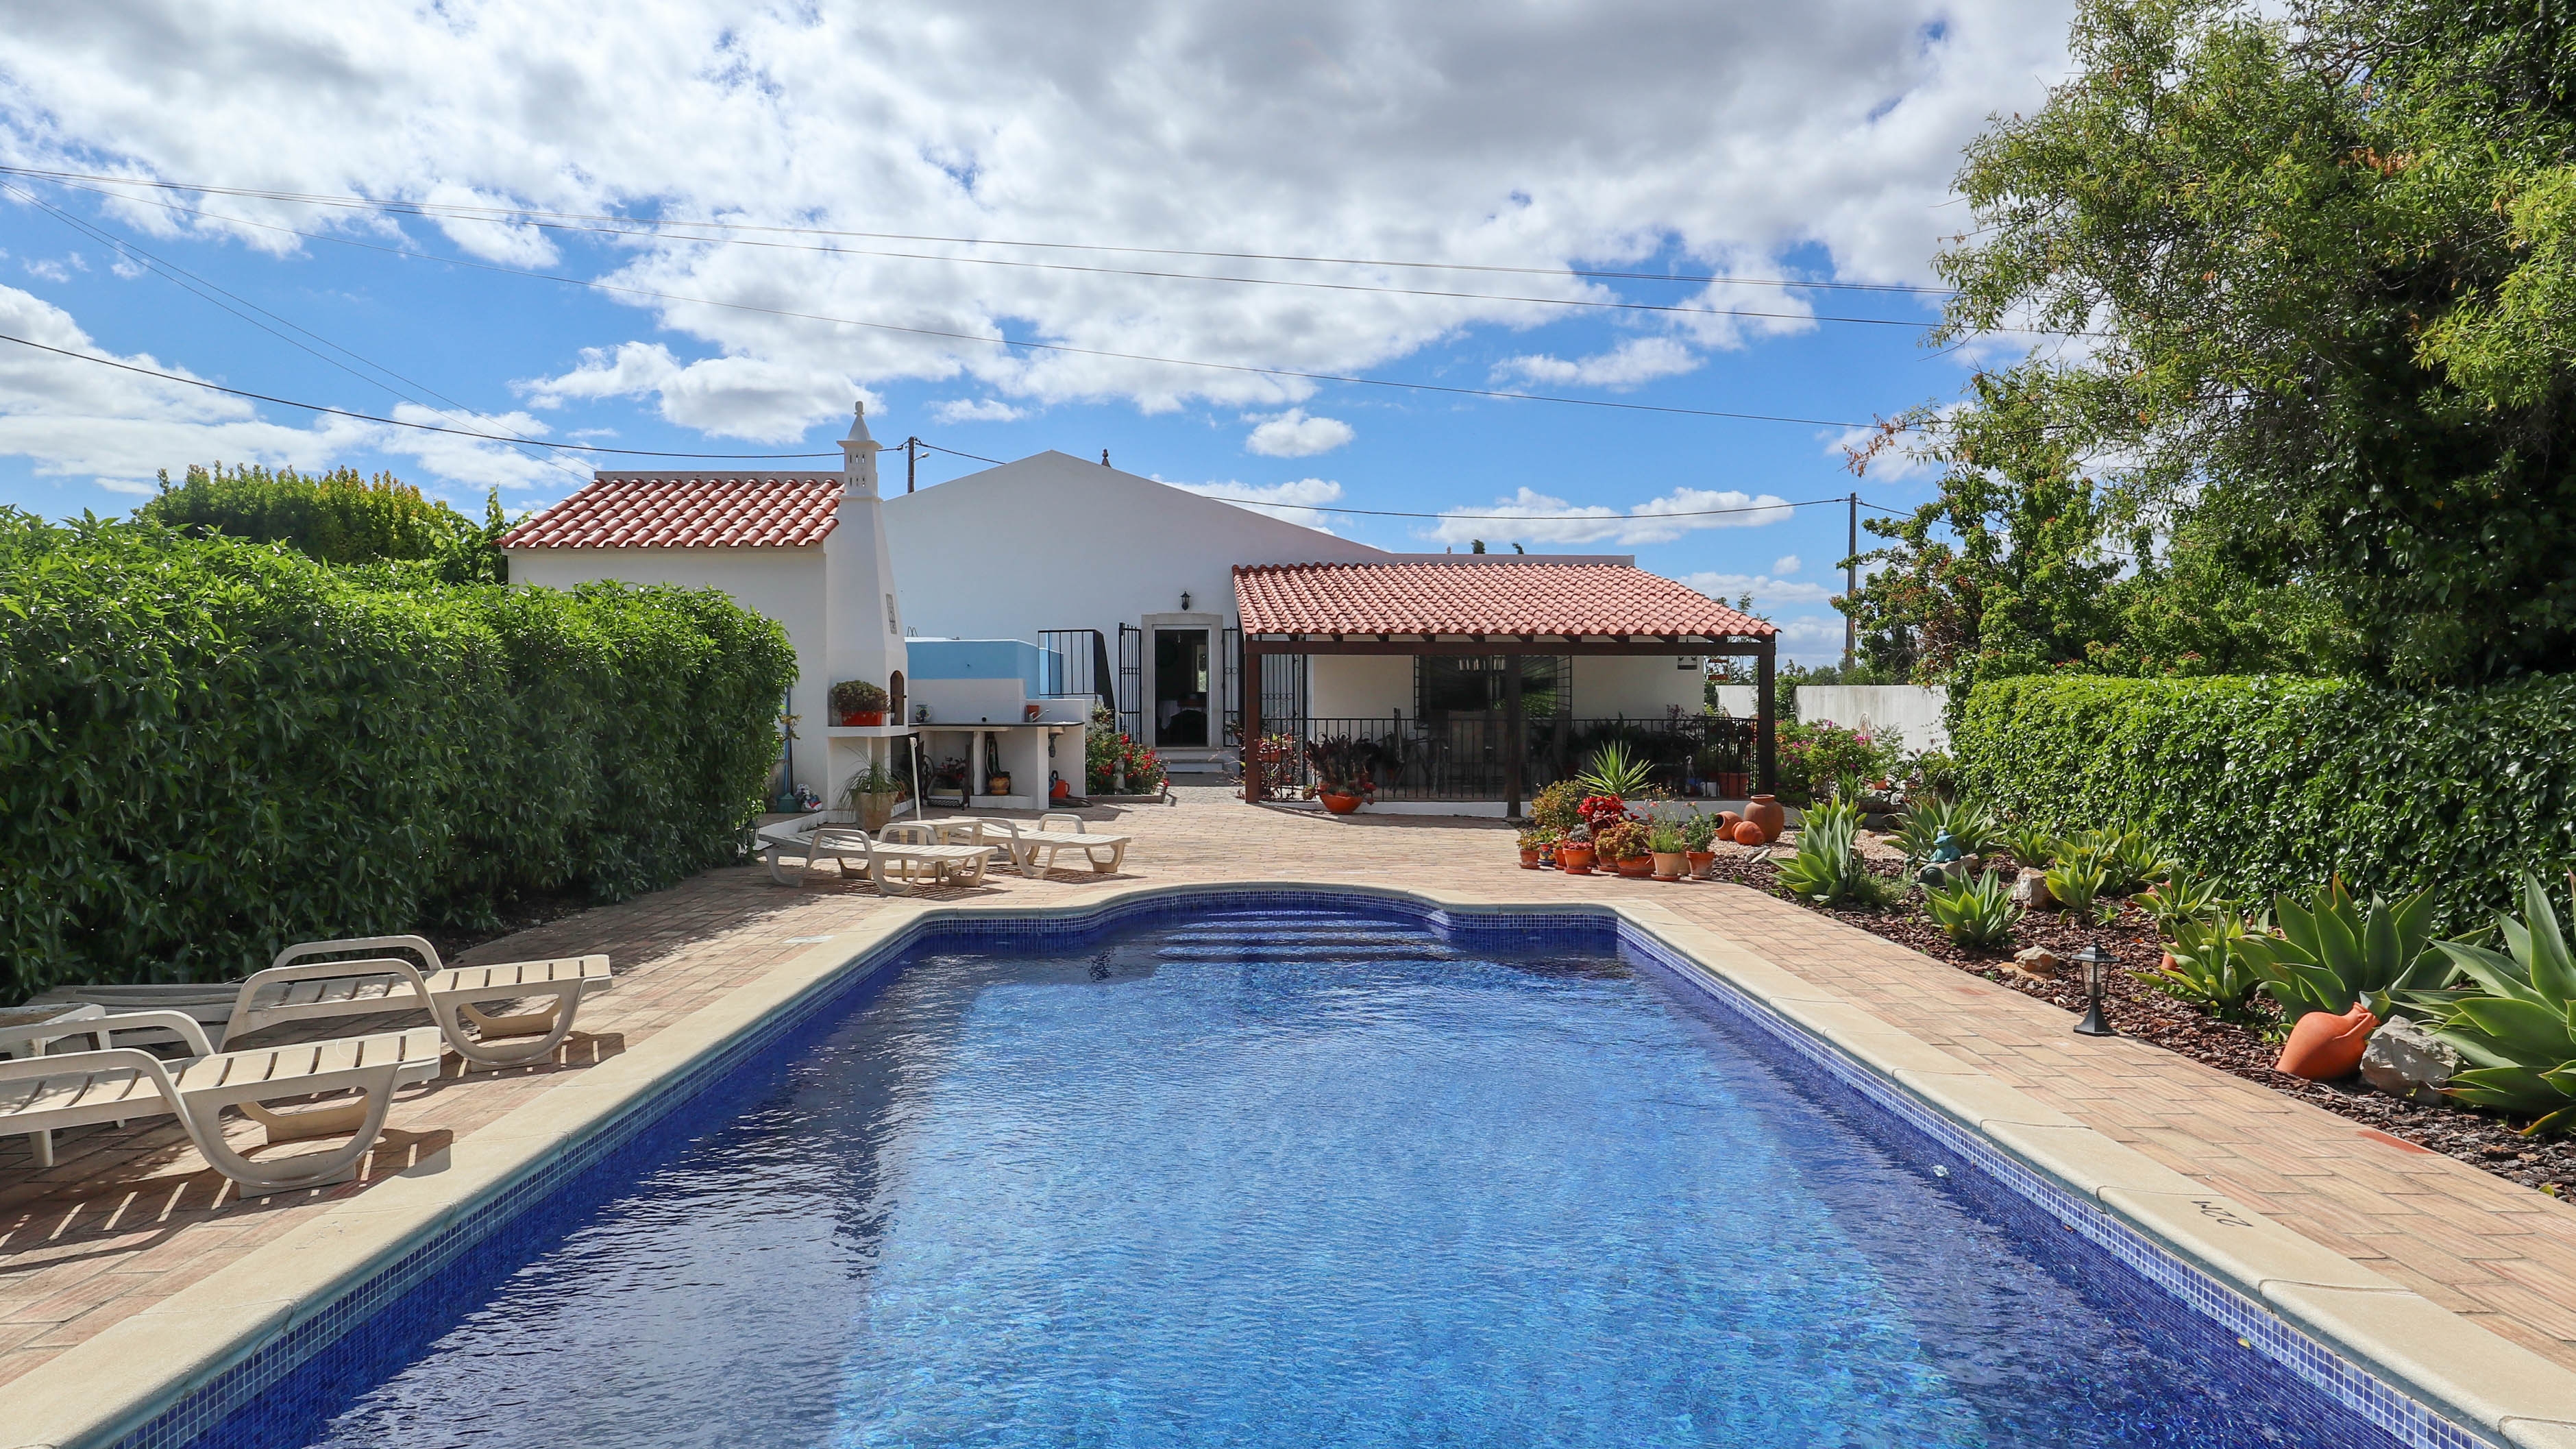 4 Bedroom Detached Villa with Pool near São Brás de Alportel | VM2246 A 4 bedroom Portuguese villa farm house style located in the countryside just 7 minutes drive from São Brás de Alportel where you have all the amenities.